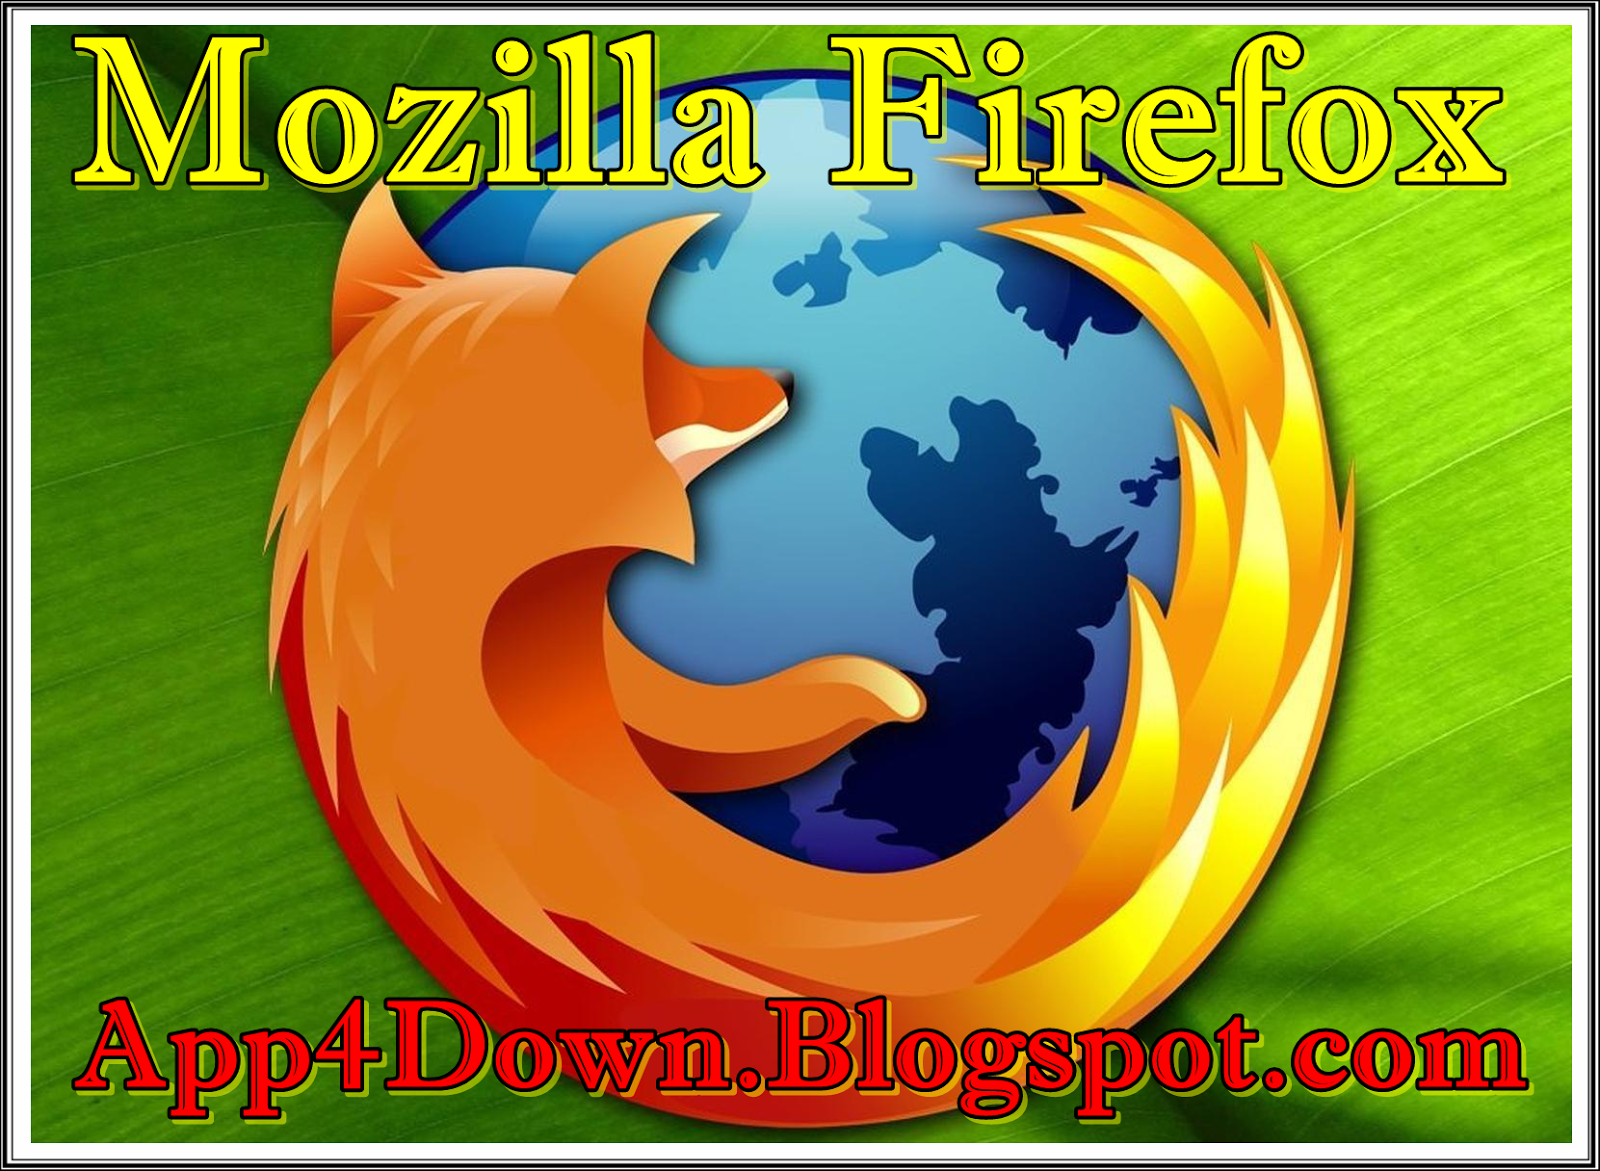 what is the latest mozilla firefox update